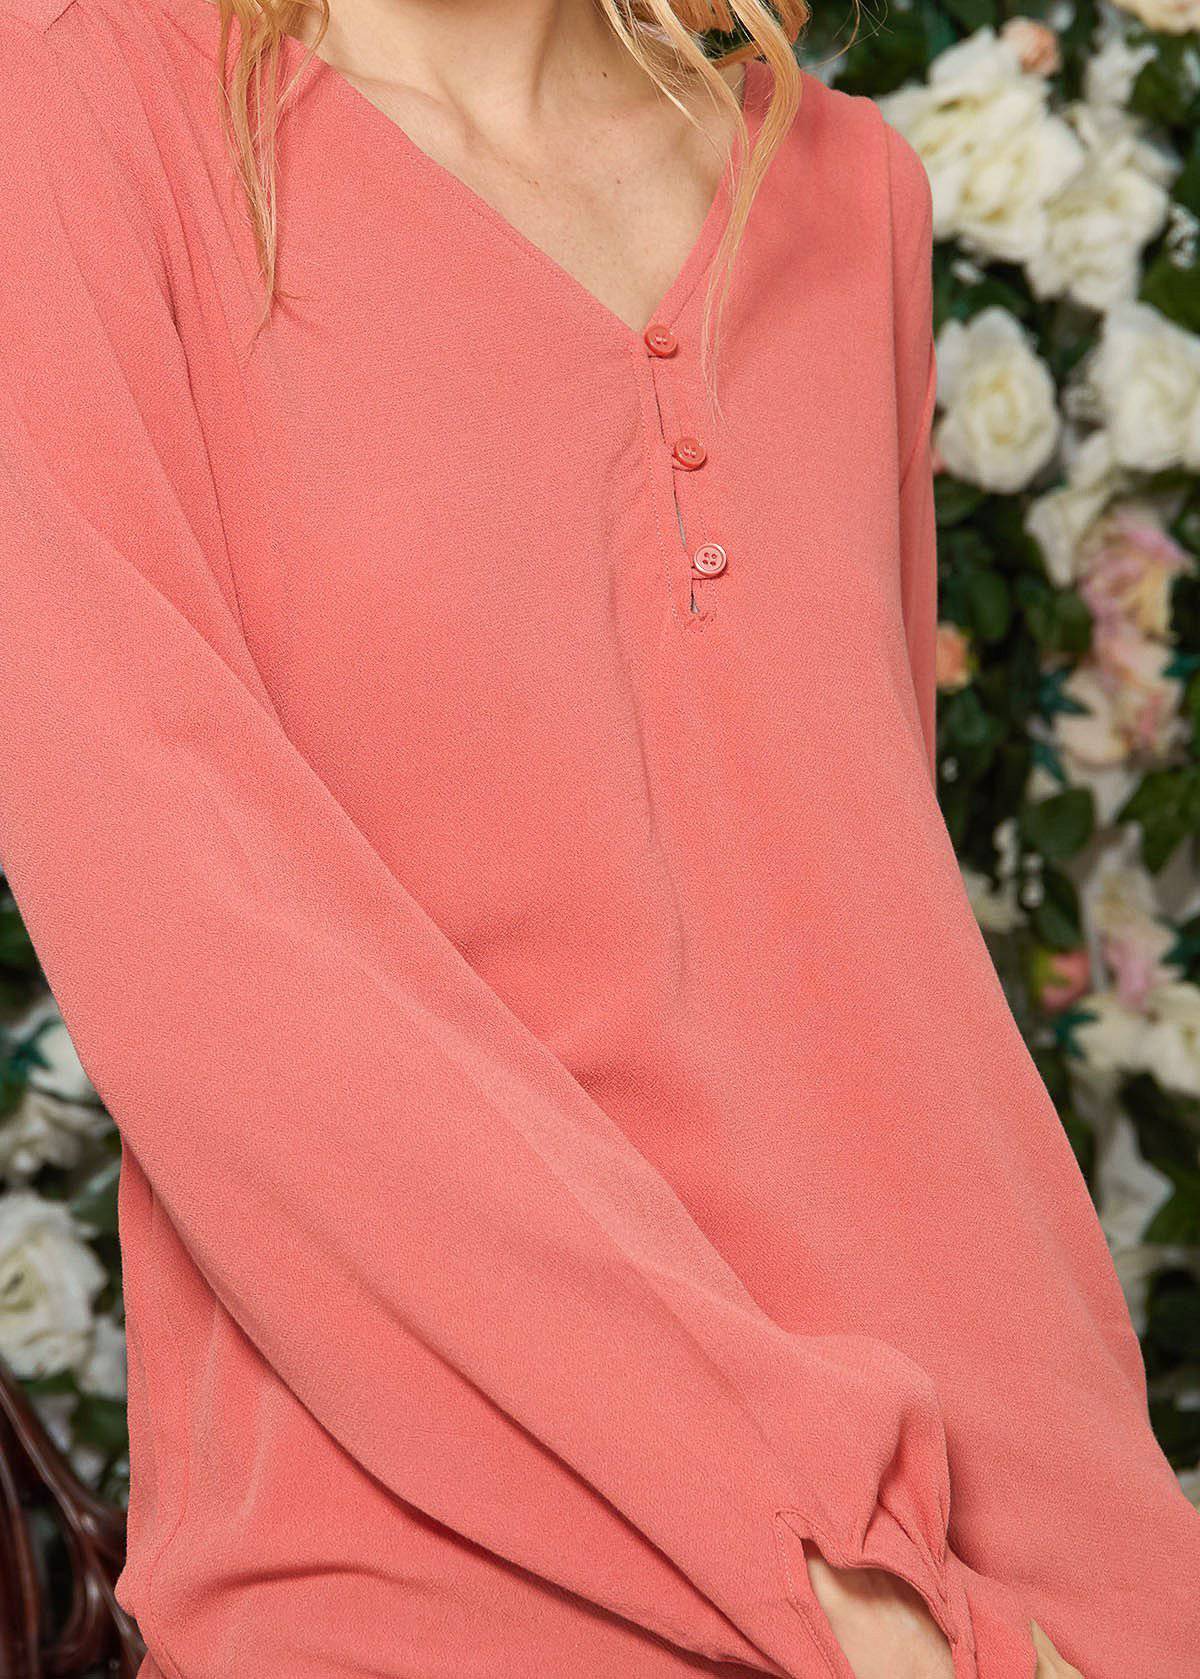 Floral V-neck Tie Cuff Blouse In Coral Faded by Shop at Konus